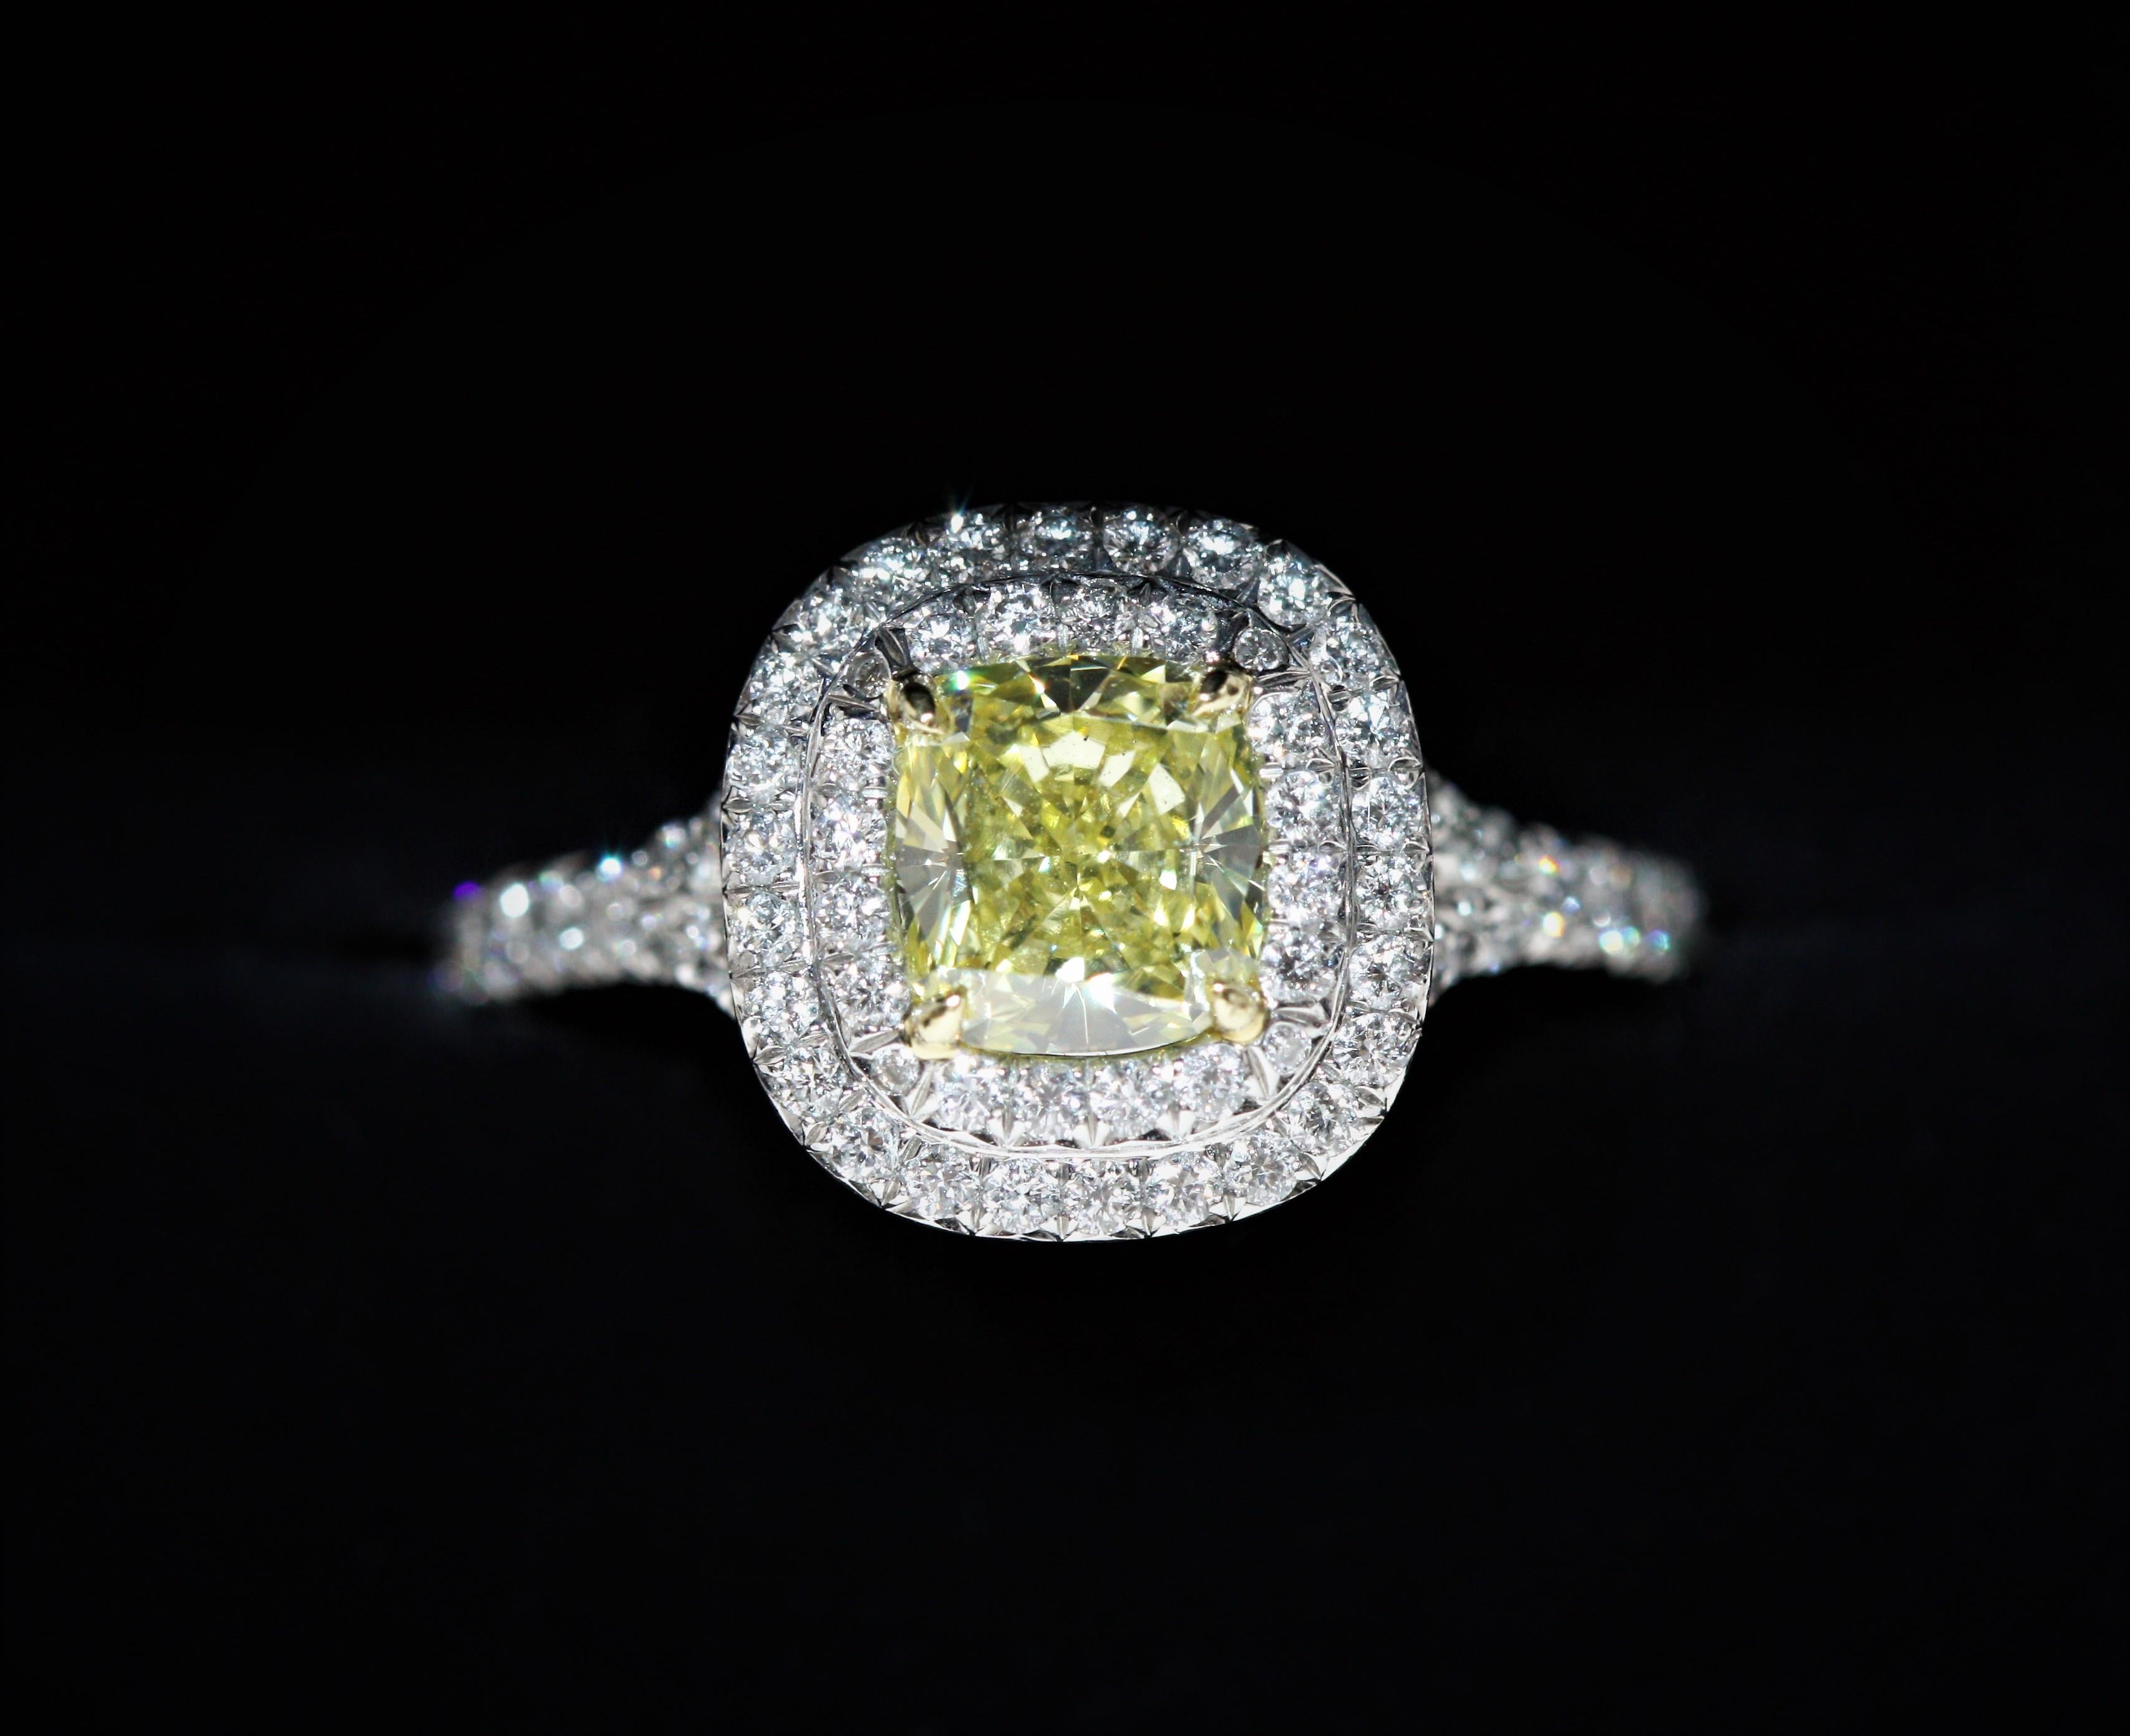 0.92 ct Fancy Intense Yellow VS2 5182931031 3/0.06ct. TIFFANY SOLESTE® CUSHION Ring

Once reserved for queens and maharajahs, yellow diamonds burn with pure, high-energy color. Ring with a yellow diamond and a double row of round brilliant white